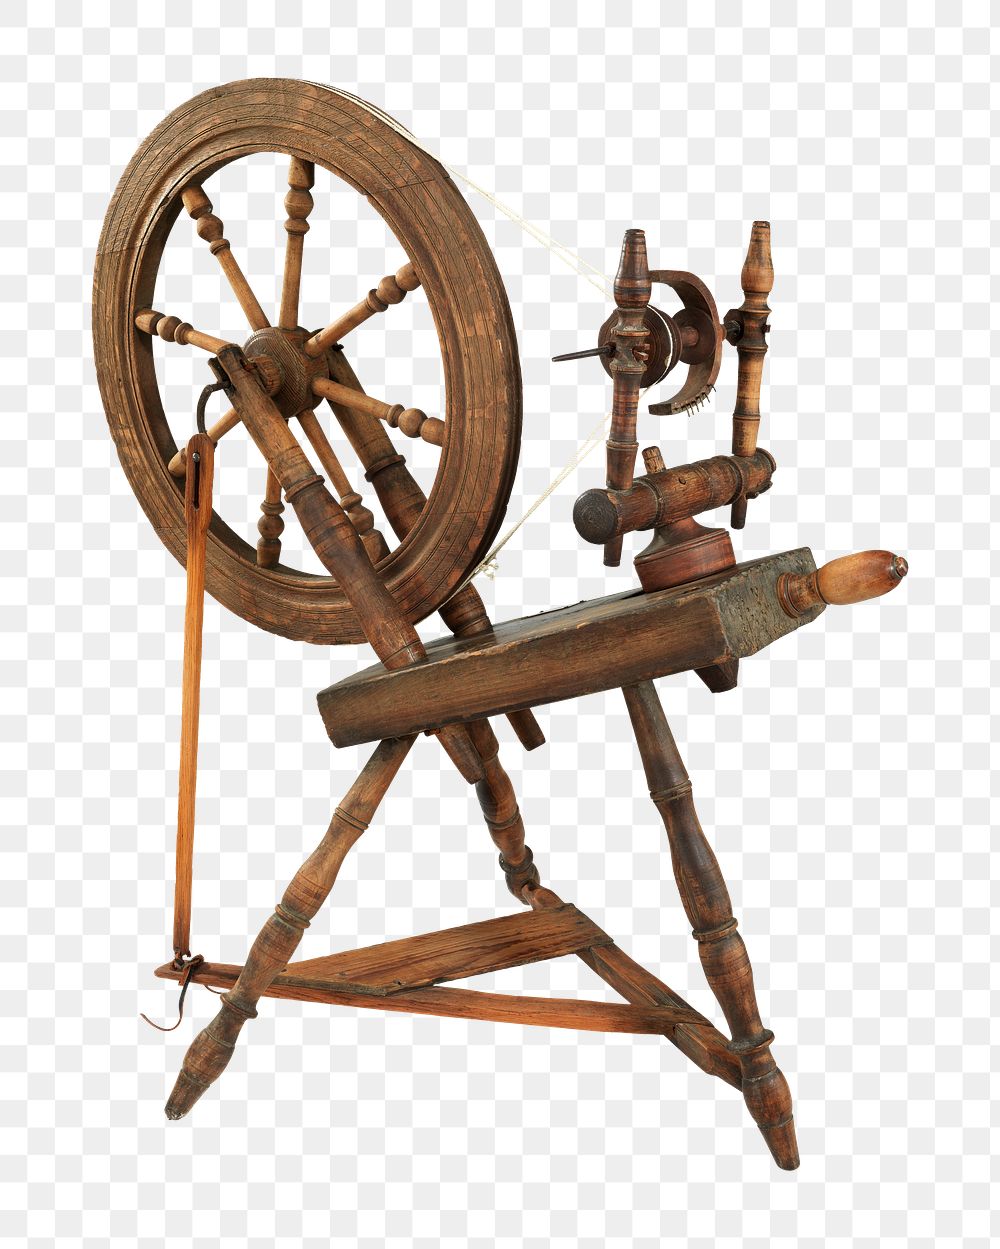 Vintage spinning wheel png, transparent background. Remixed by rawpixel.